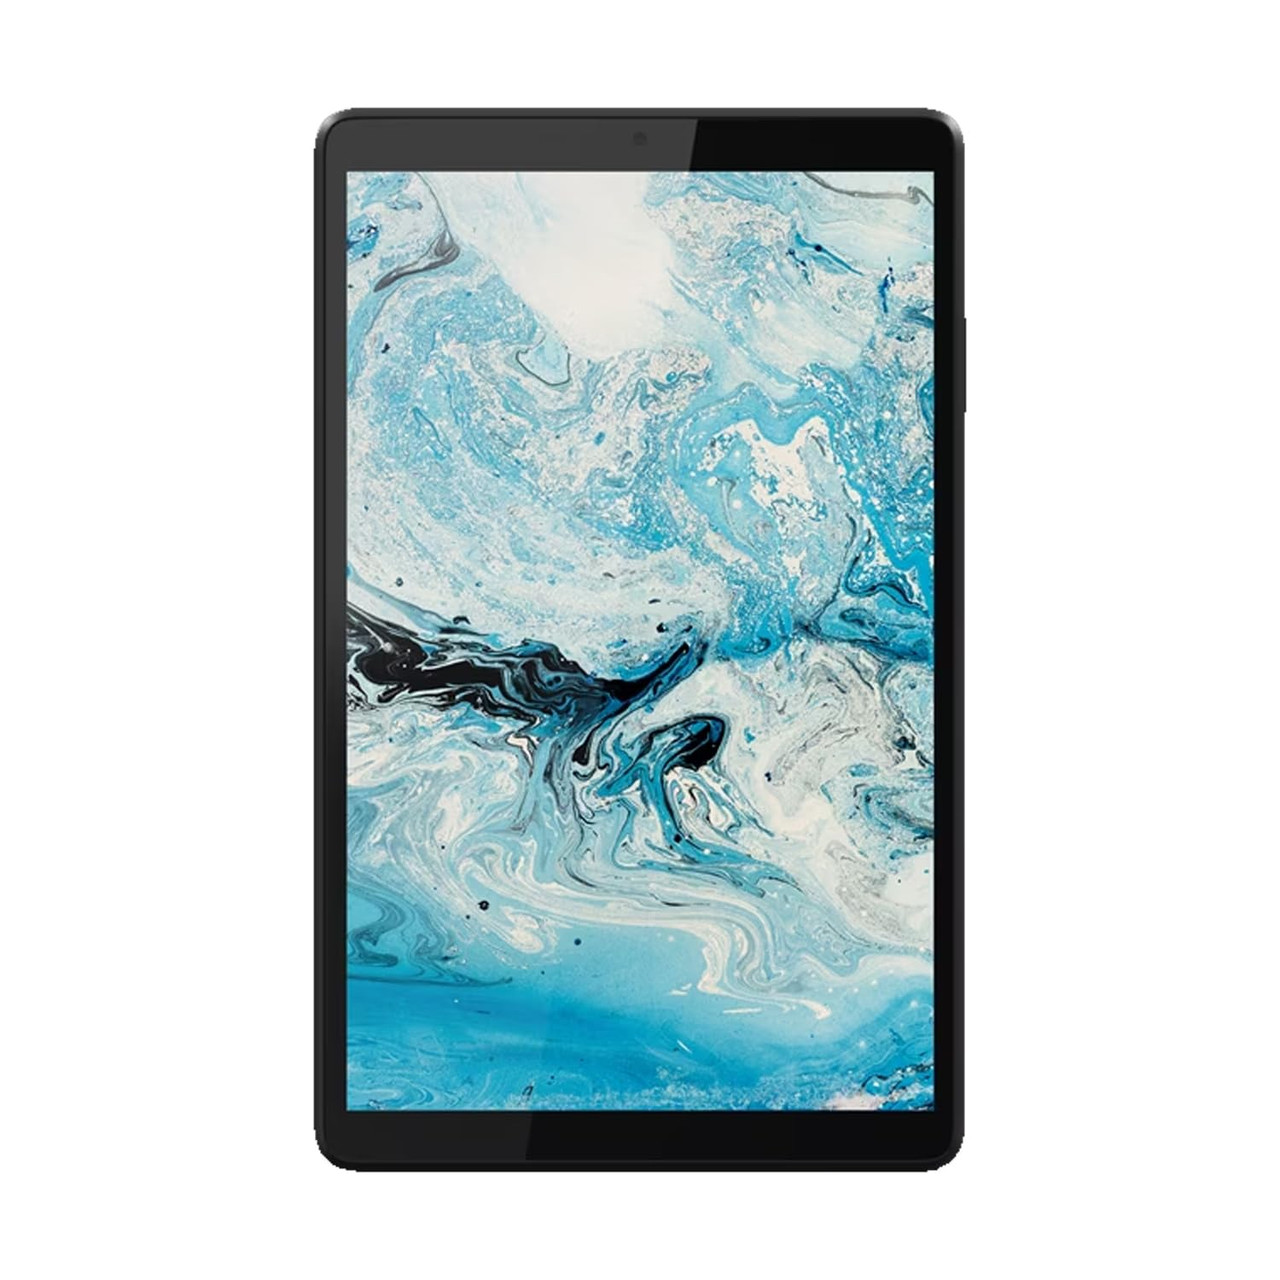 Lenovo Tab M8 for Business 8" HD Touch Tablet MediaTek Helio A22 2GB Ram 32GB eMMC Android 9 | ZA790003US | Manufacturer Refurbished